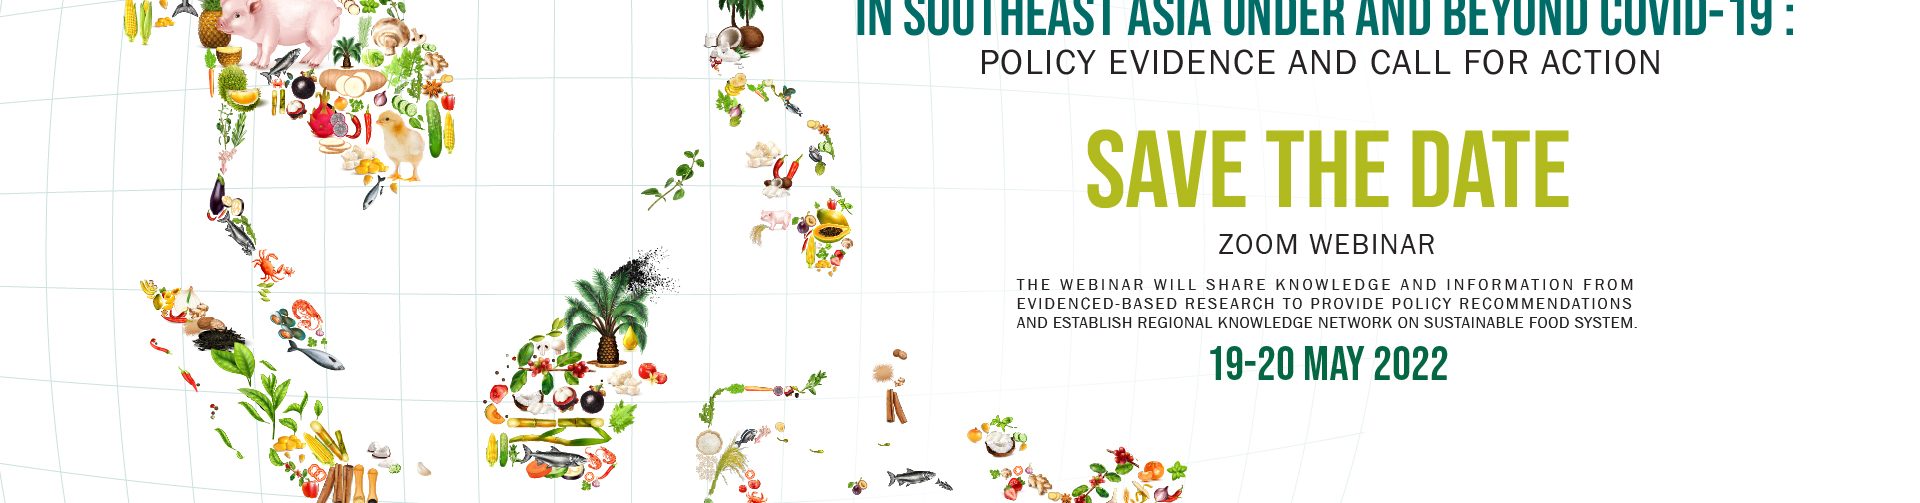 International Seminar on Sustainable Food Systems in Southeast Asia under and beyond COVID-19: Policy Evidence and Call for Action